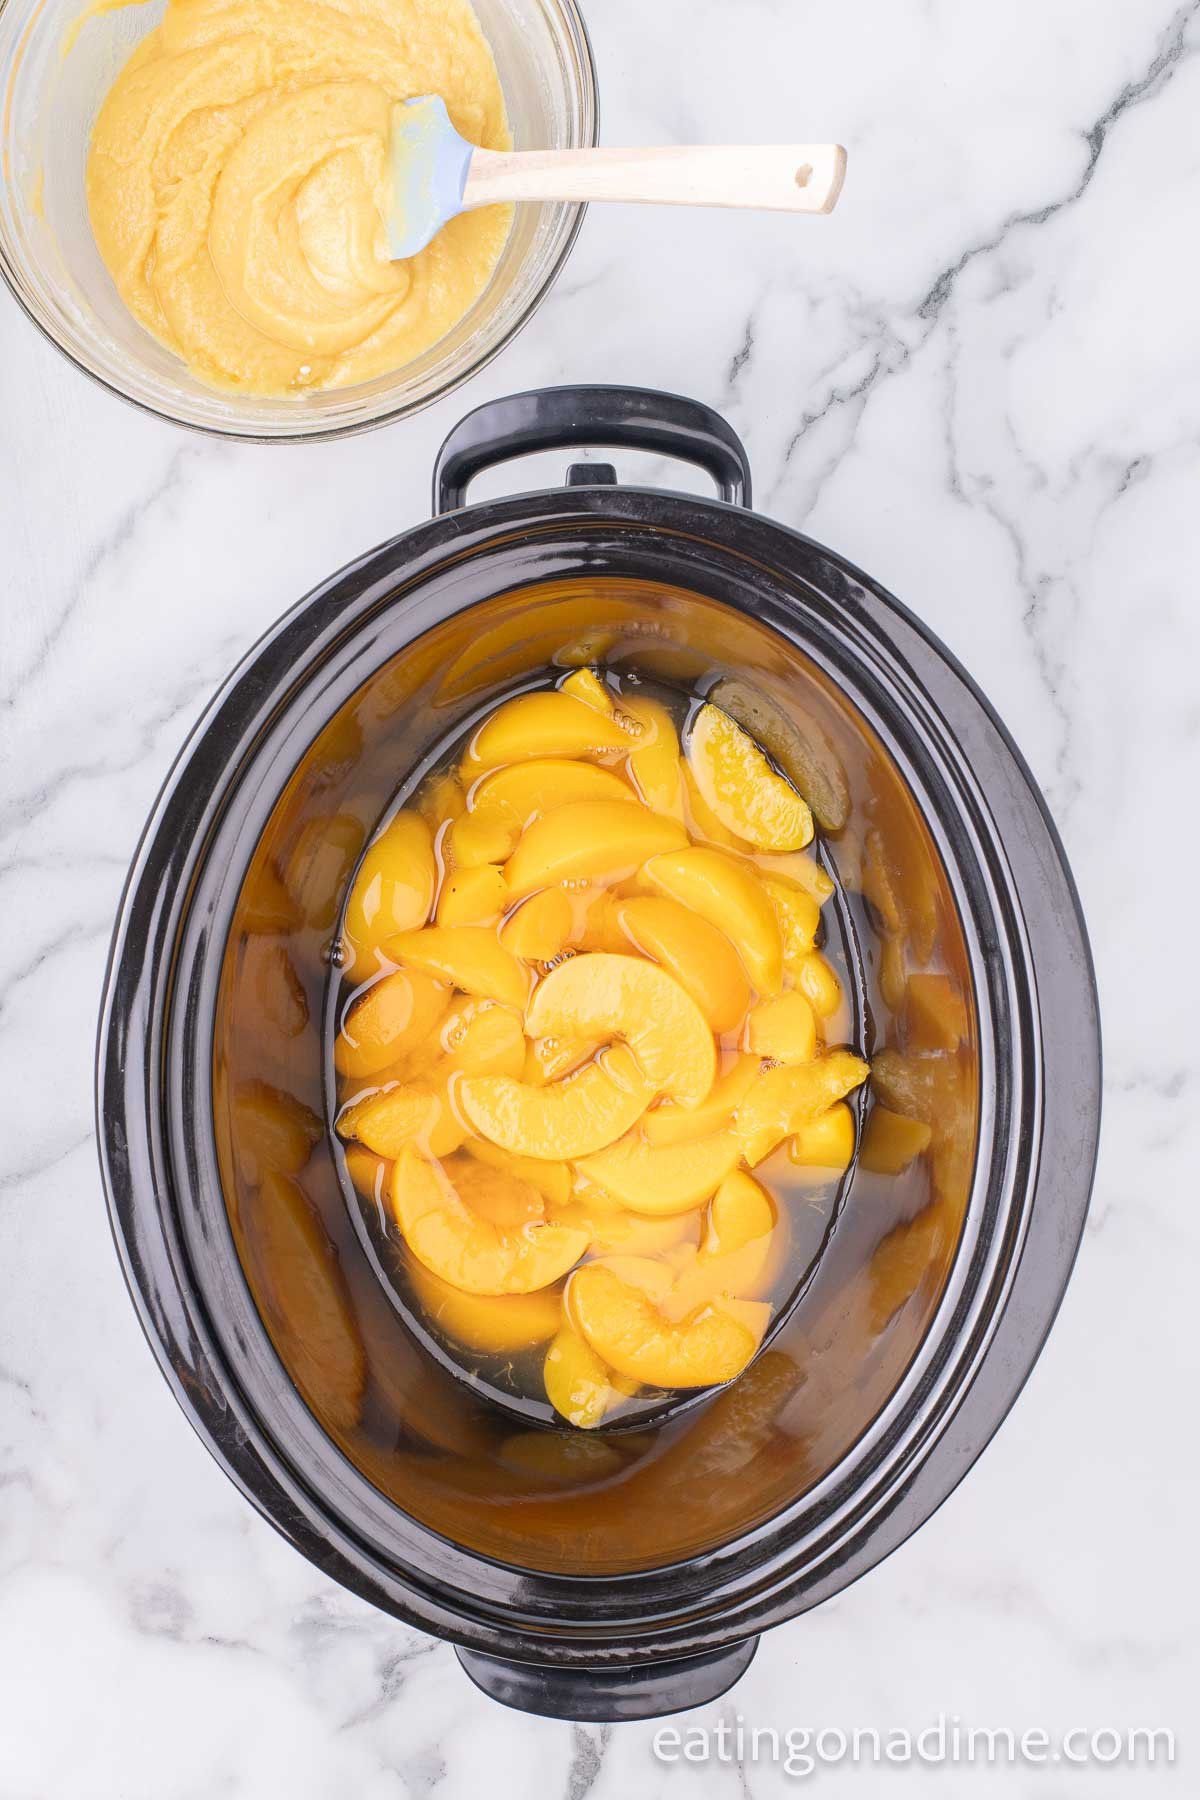 Pouring peaches in the slow cooker